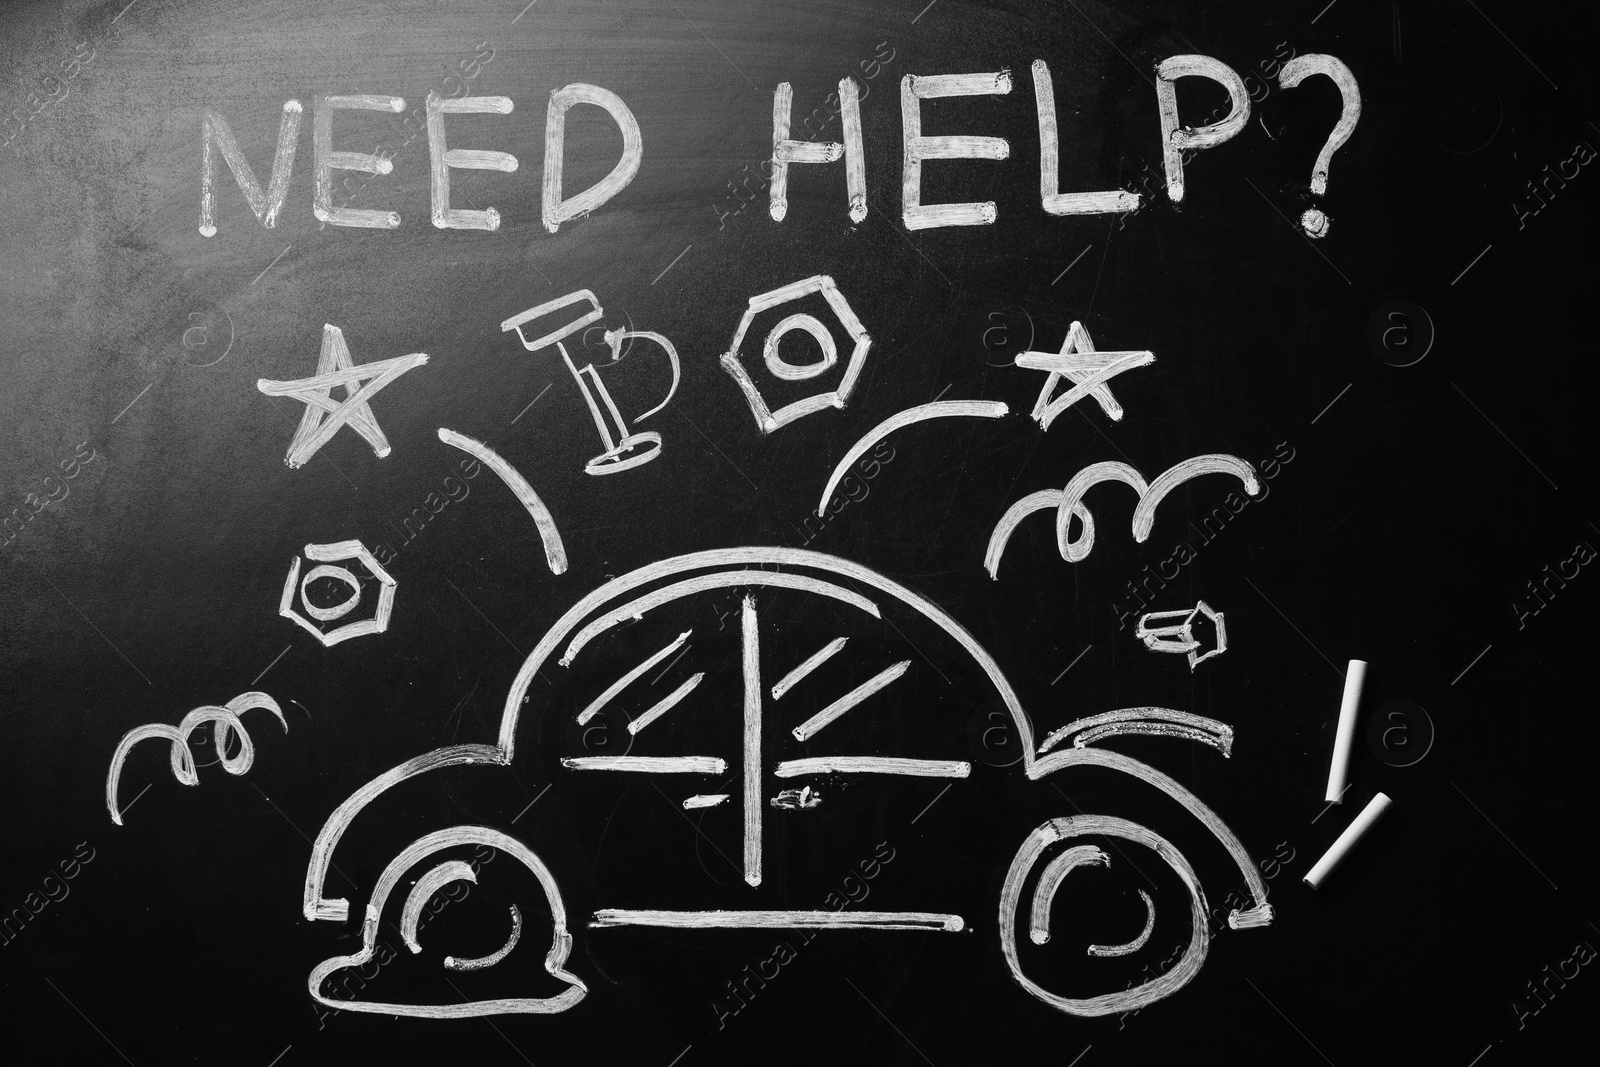 Photo of Drawing of broken car and phrase "NEED HELP?" on chalkboard